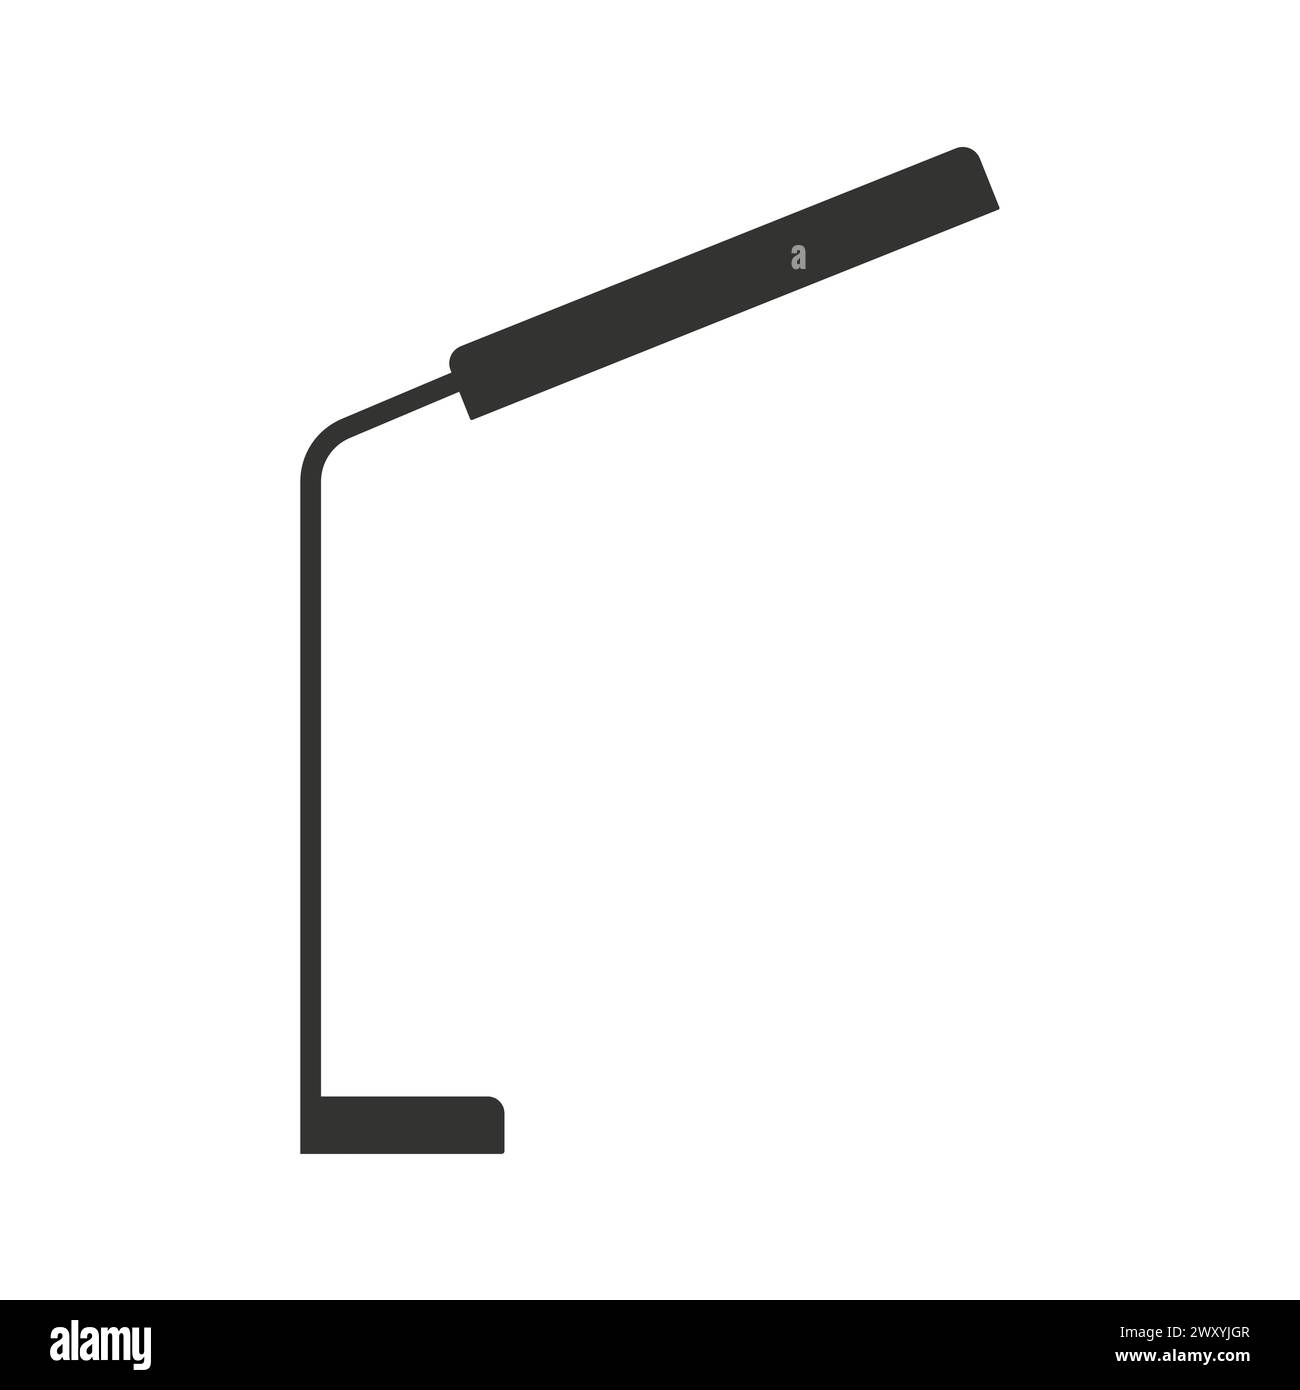 Vector isolated illustration with black icon of office phyto lamp. Light UV eqipment to grow micro greens and plant at home. Fito bulb is good tool to Stock Vector